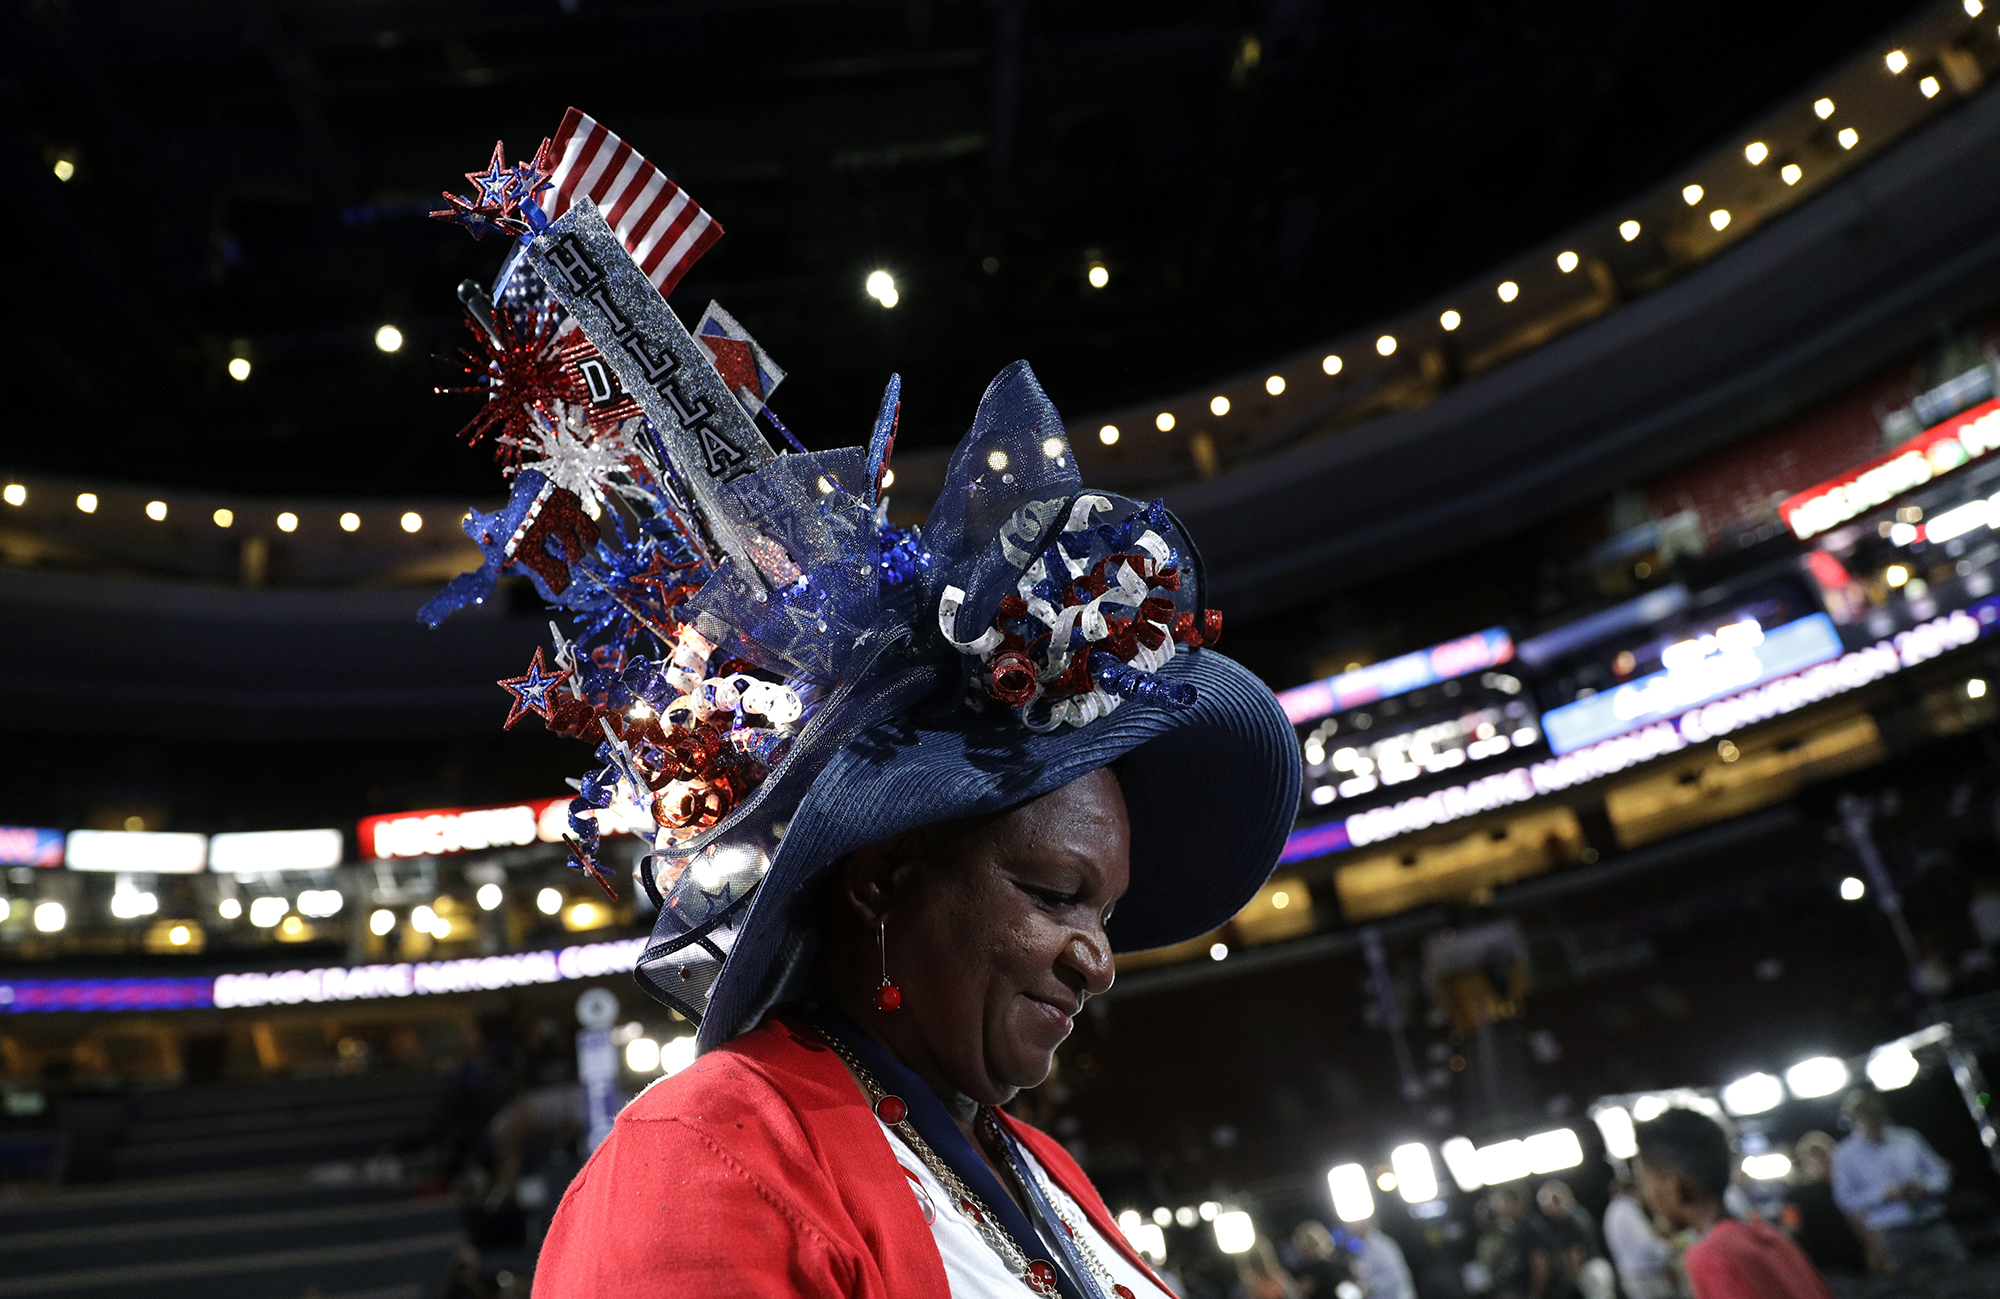 A Different View of the Democratic National Convention